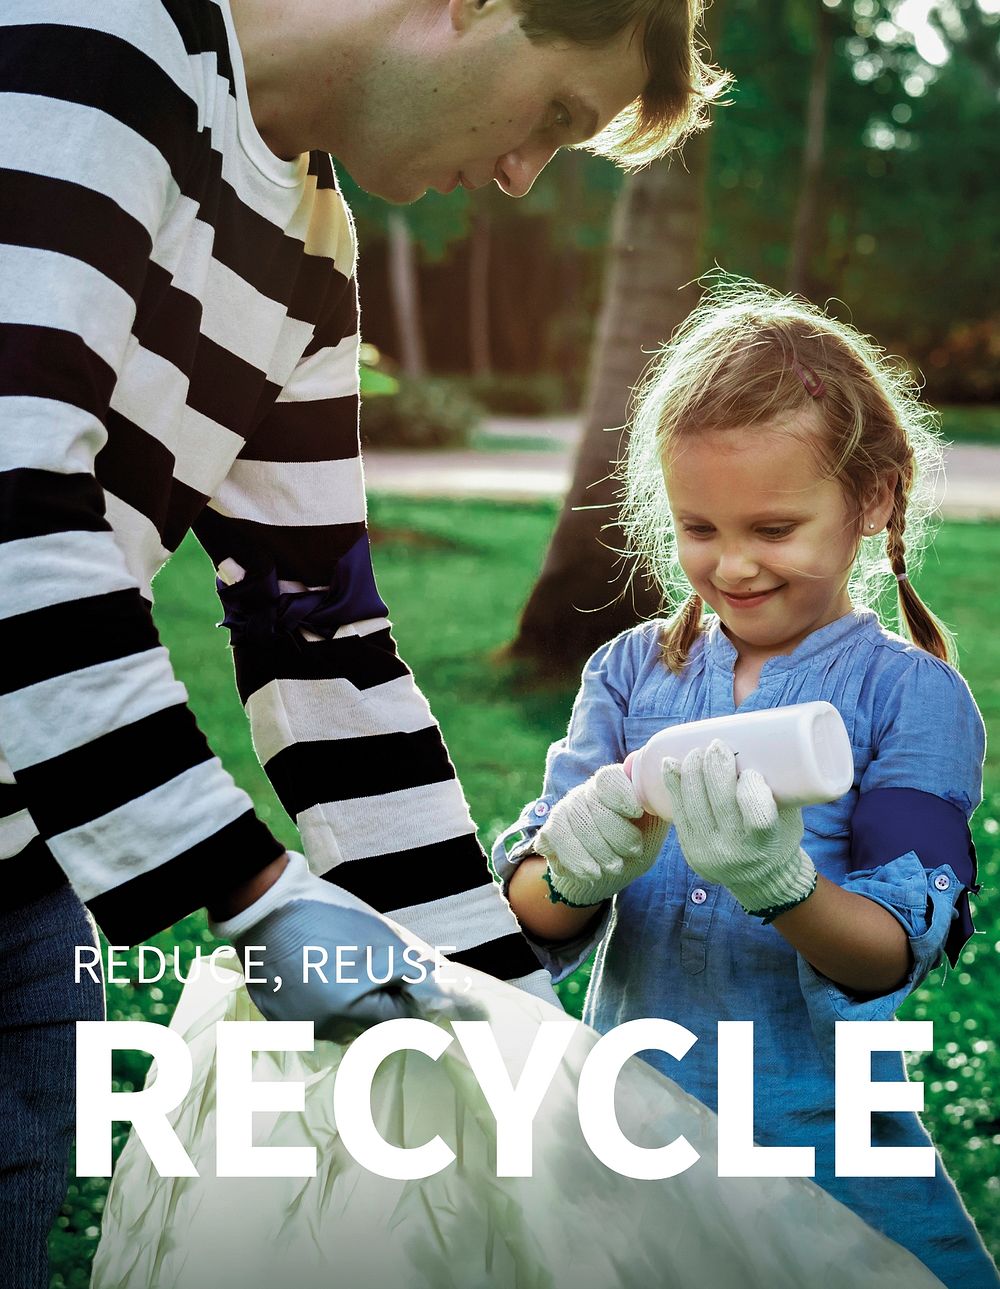 Reduce, reuse, recycle template vector for environment flyer